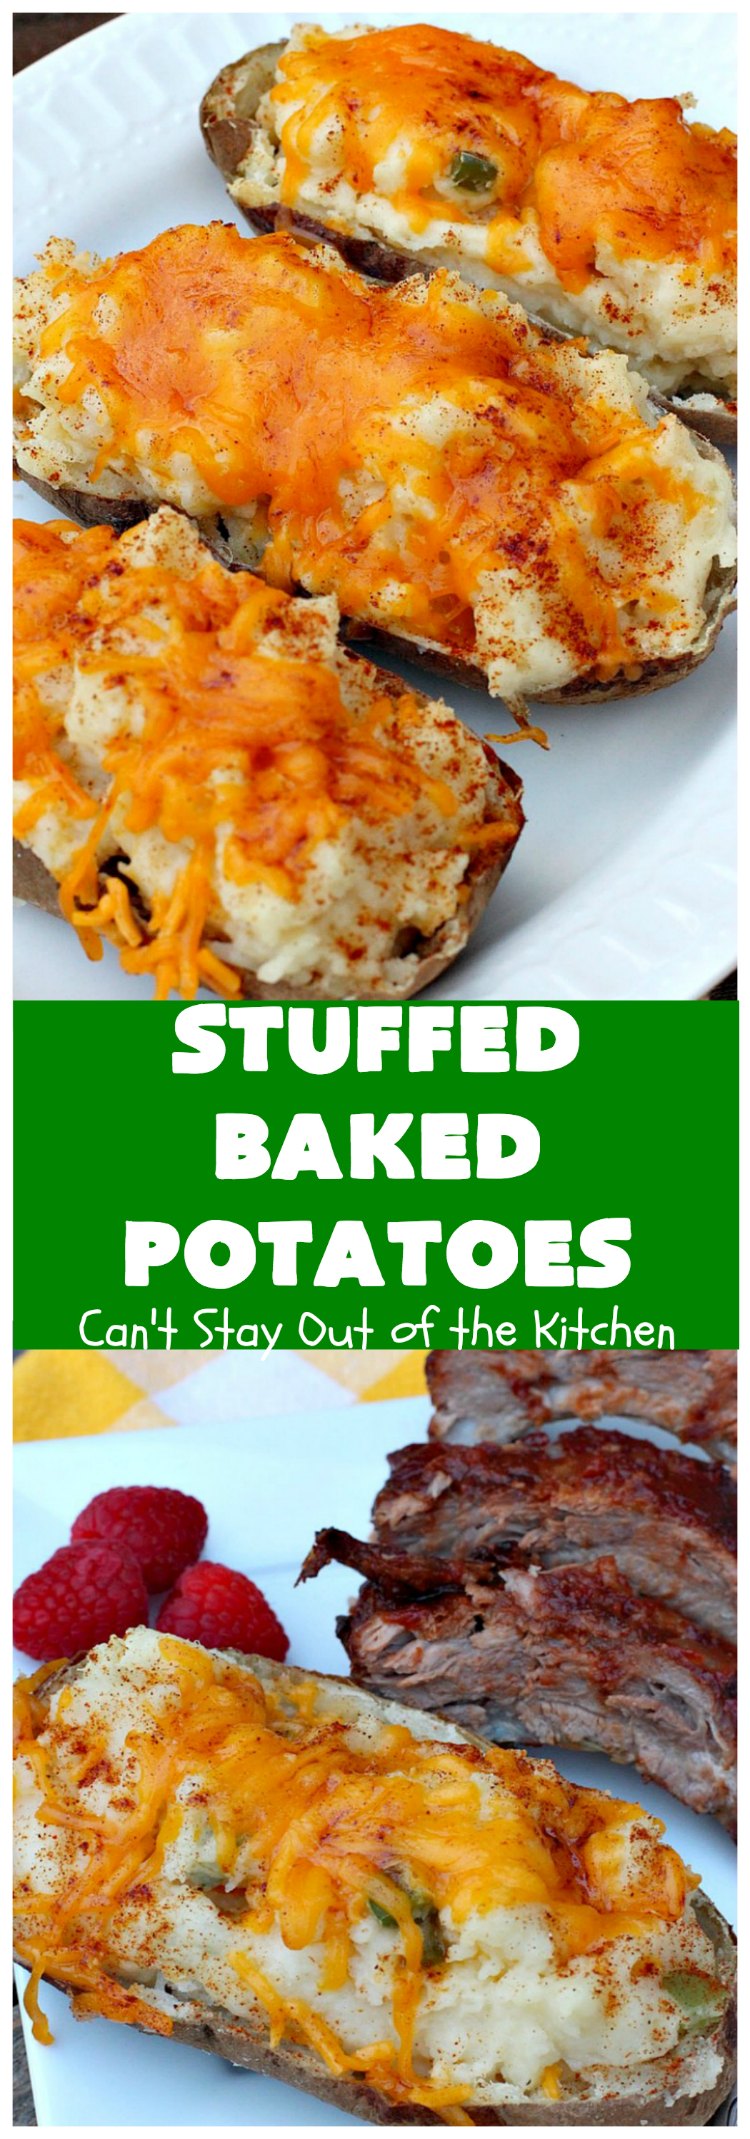 Stuffed Baked Potatoes | Can't Stay Out of the Kitchen